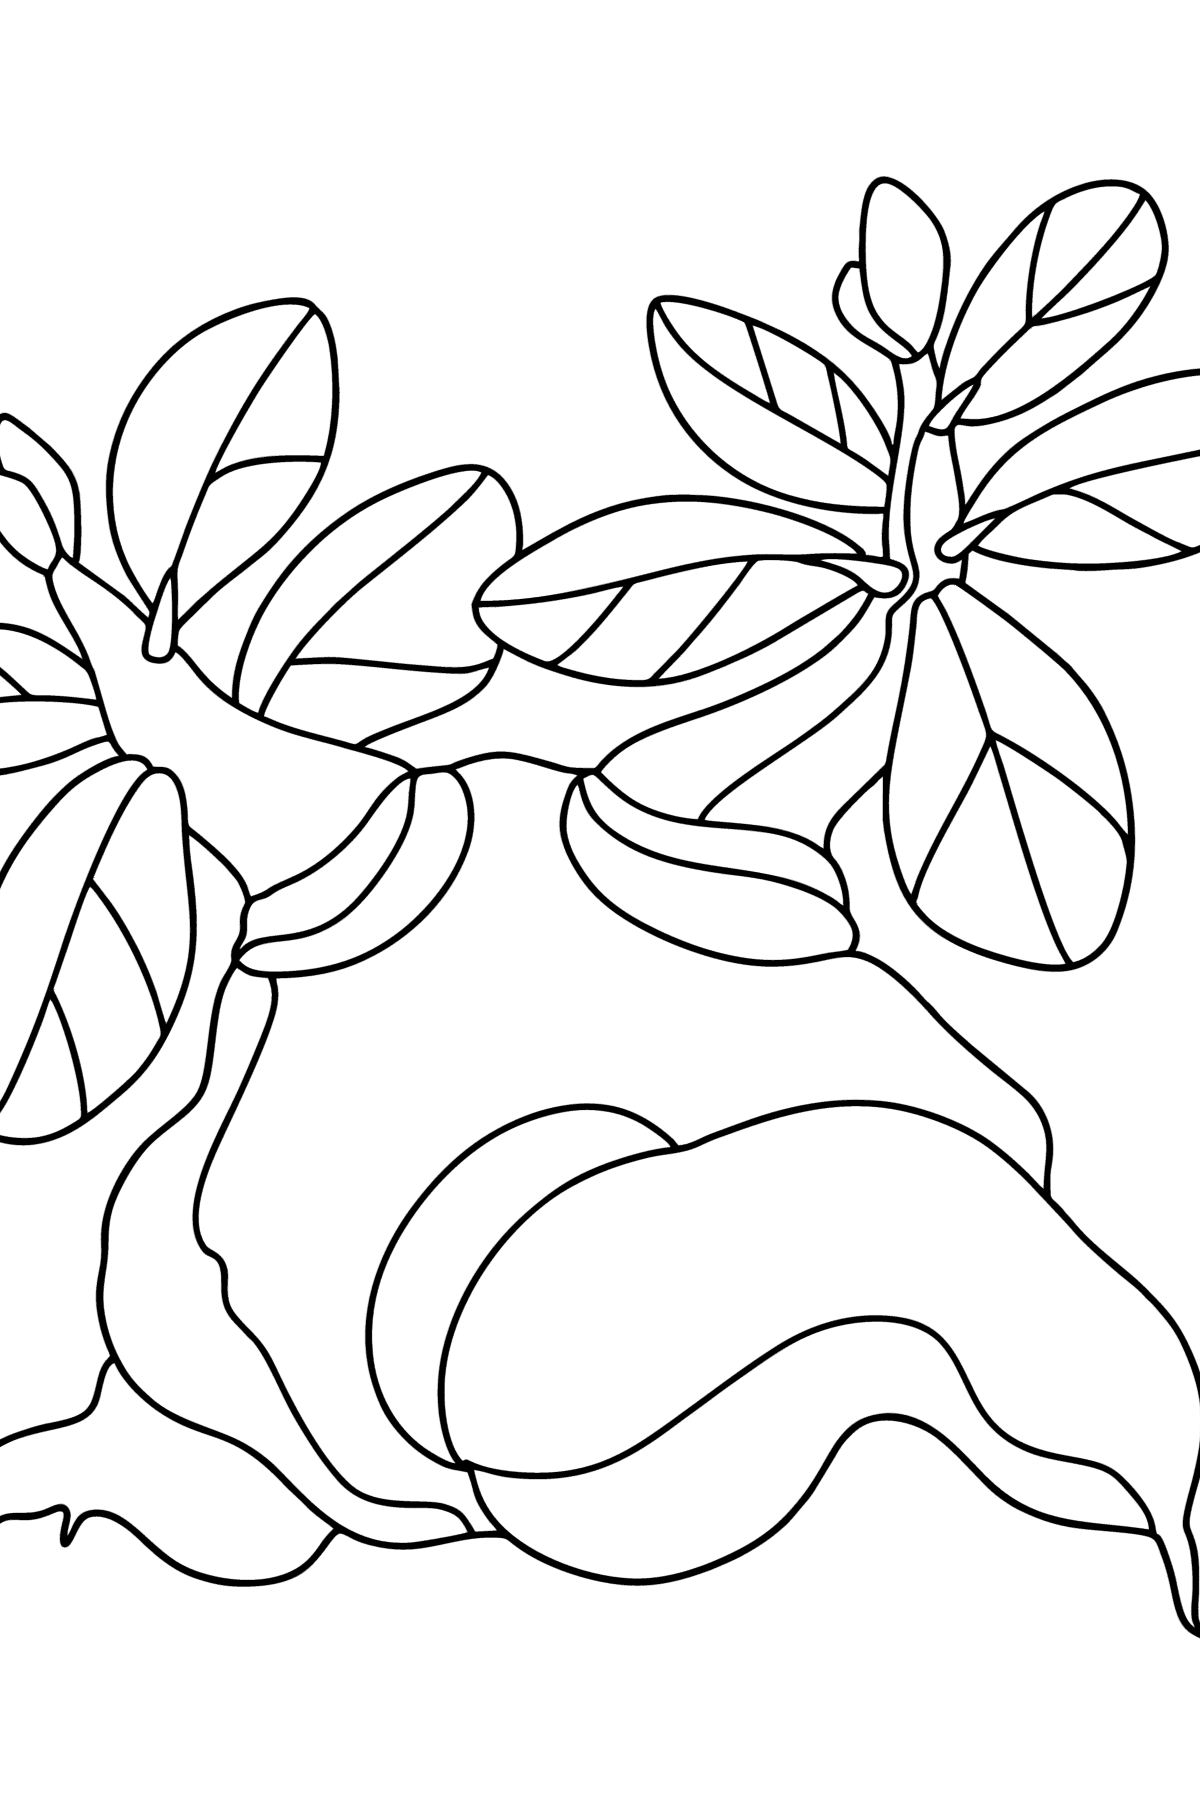 Adenium coloring page - Coloring Pages for Kids